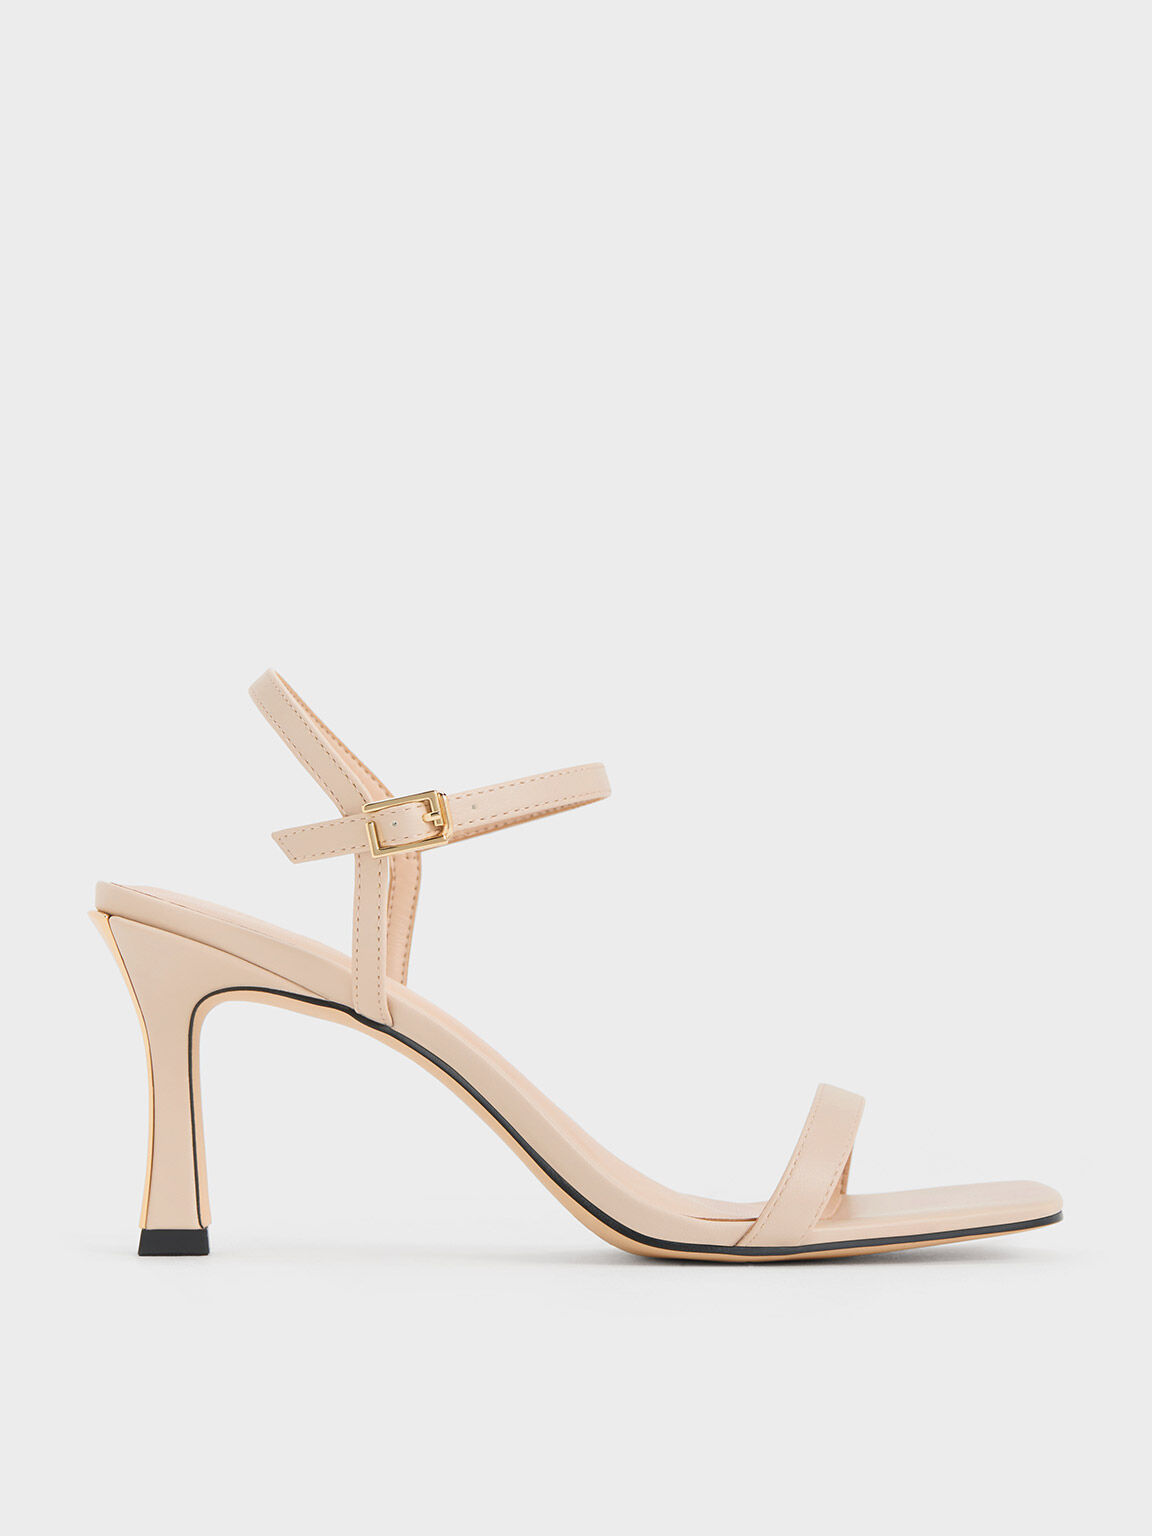 Nude Square-Toe Heeled Sandals - CHARLES & KEITH ID